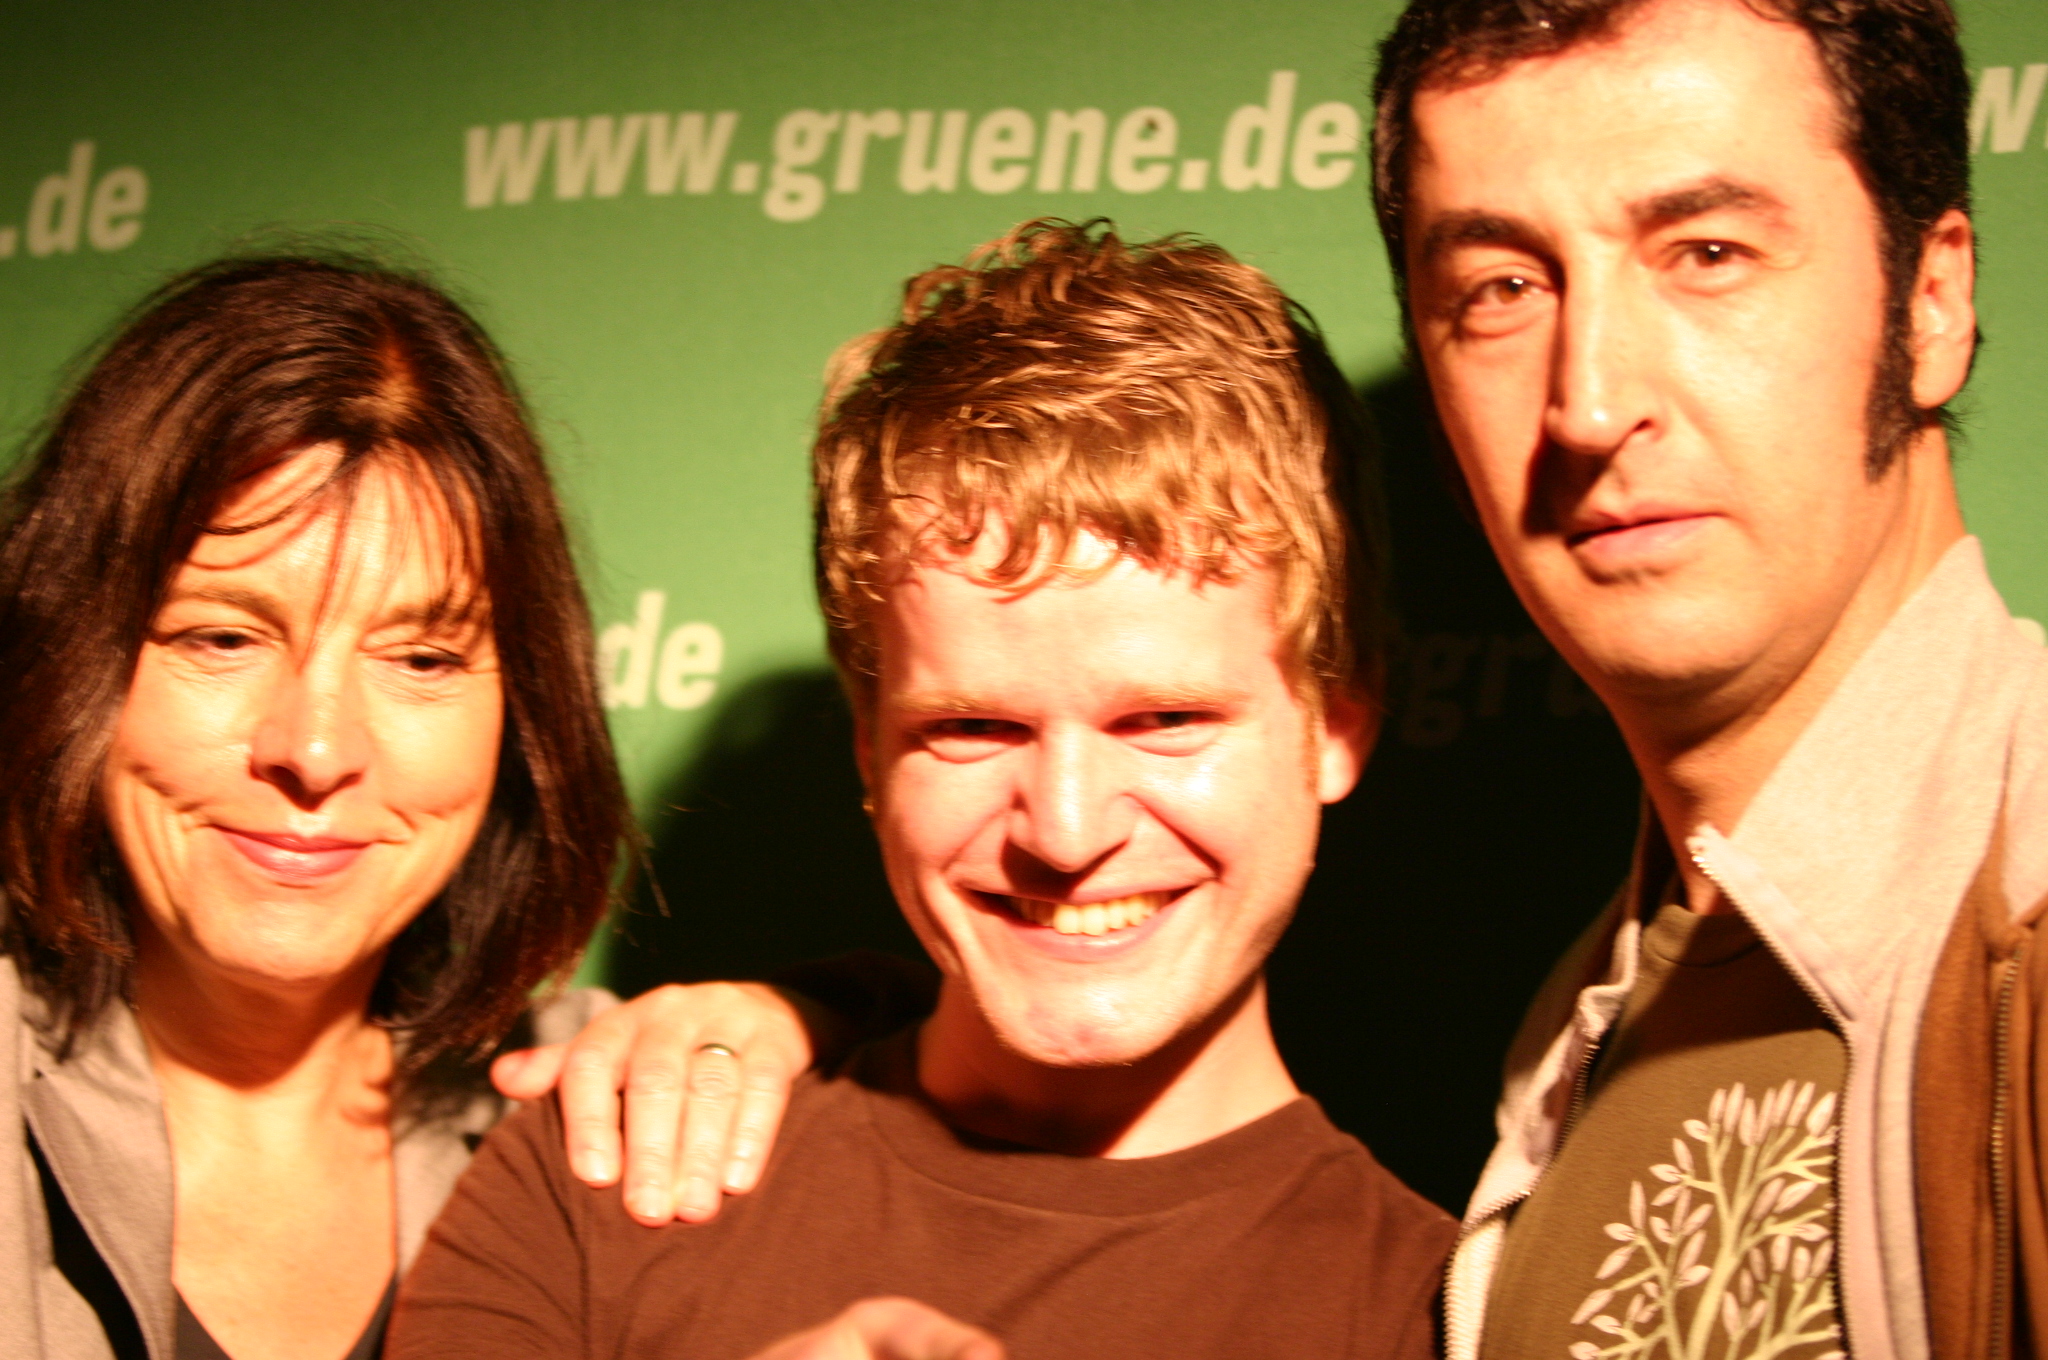 two men and a woman are posing for a picture